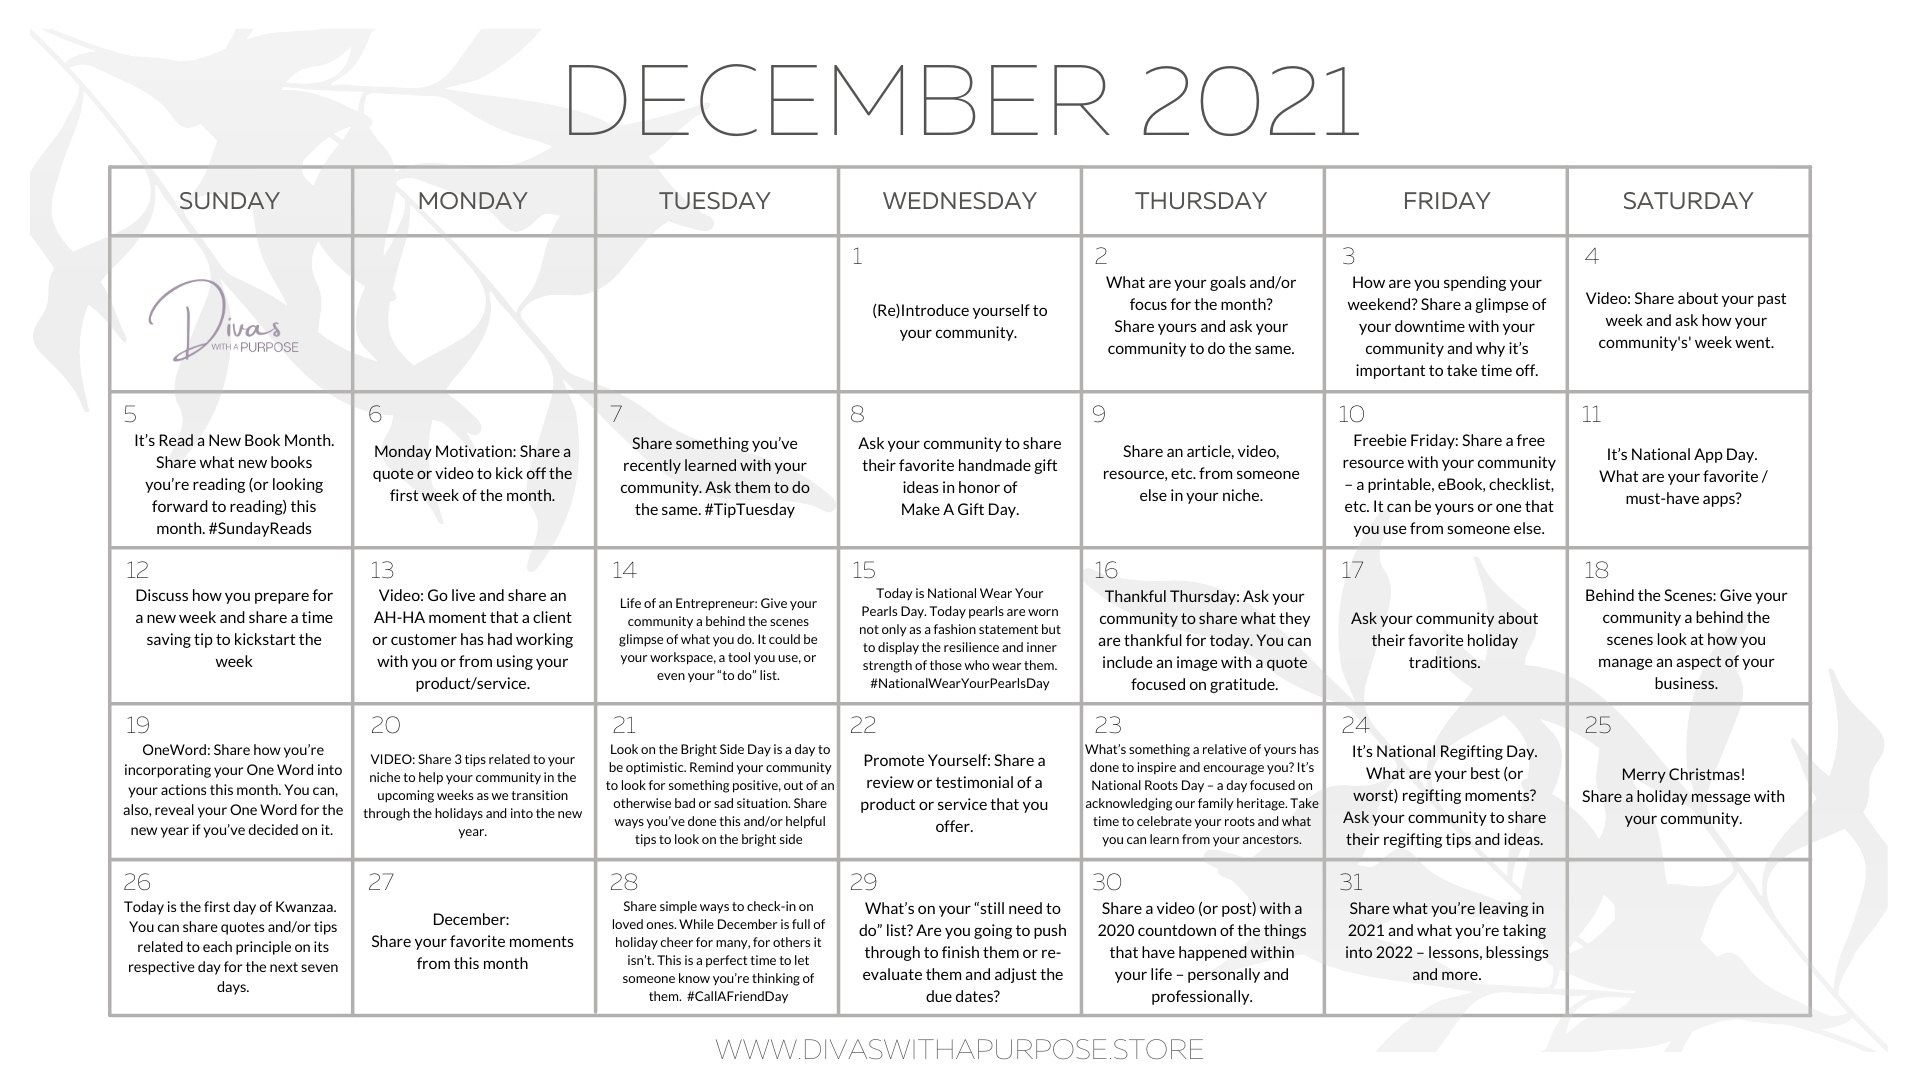 Here are December Social Media Prompts to help you show up consistently and prepare your social media content calendar for the month.